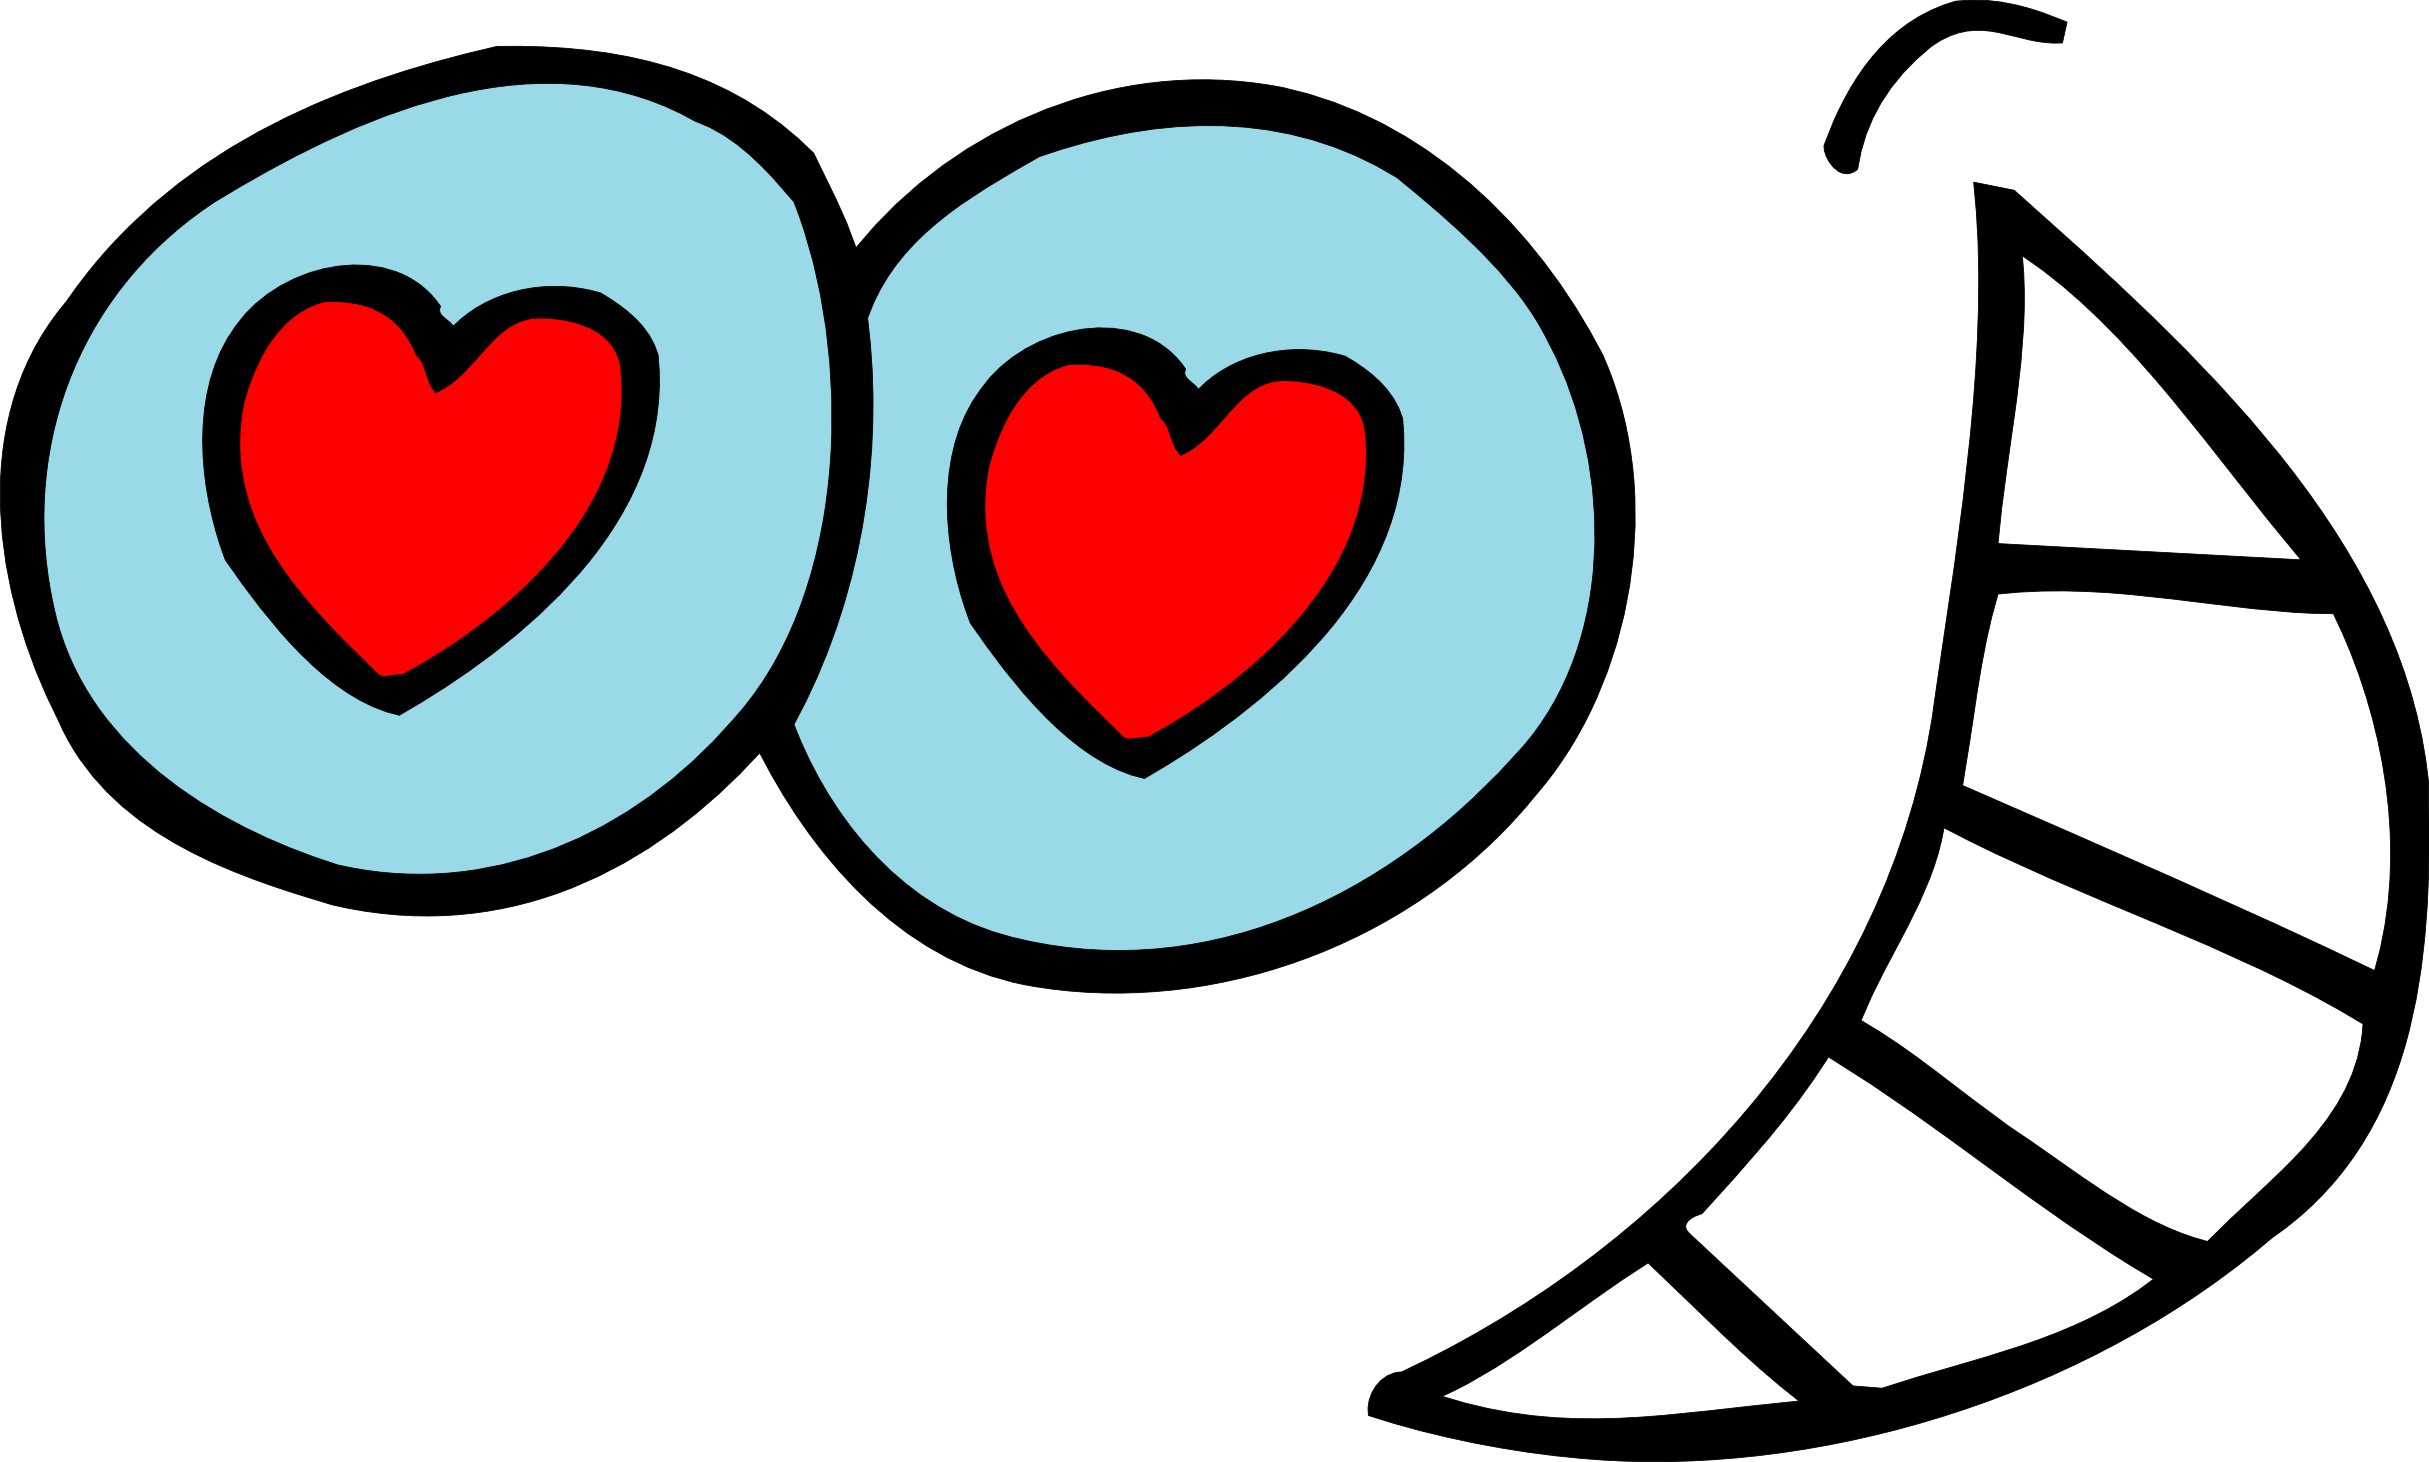 Eyes with hearts clipart